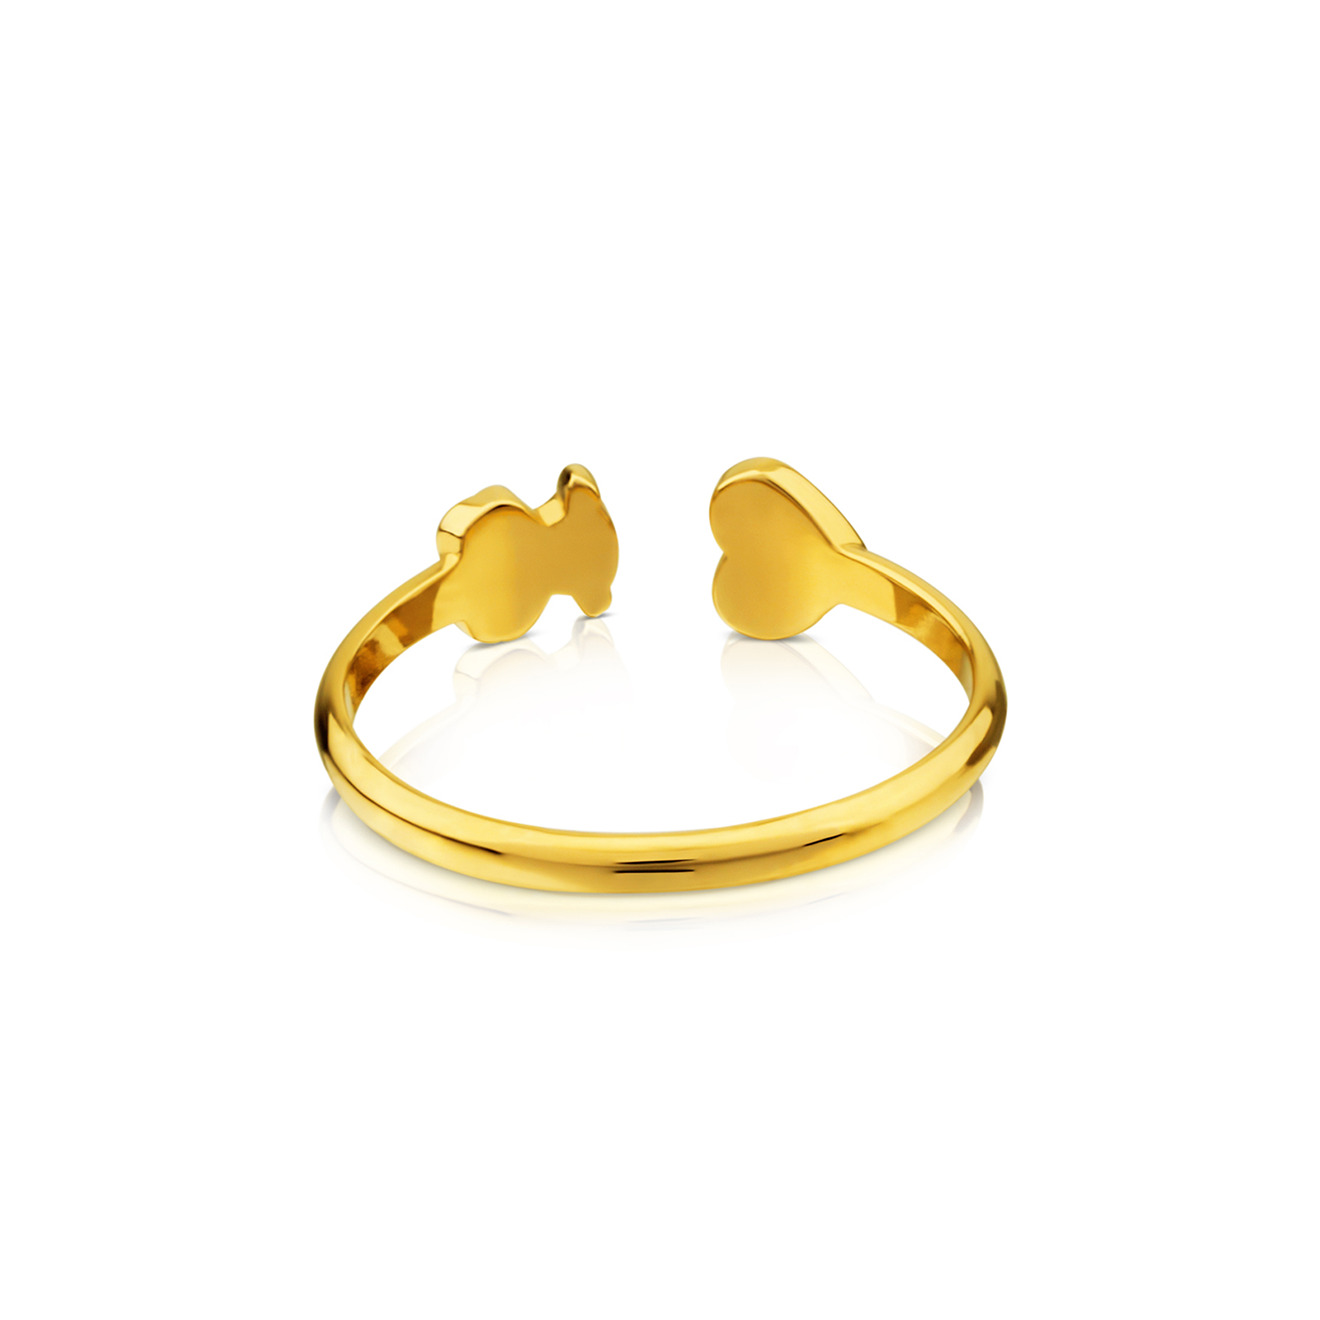 Sweet Dolls XXS Yellow Gold Ring – buy at Poison Drop online store, SKU